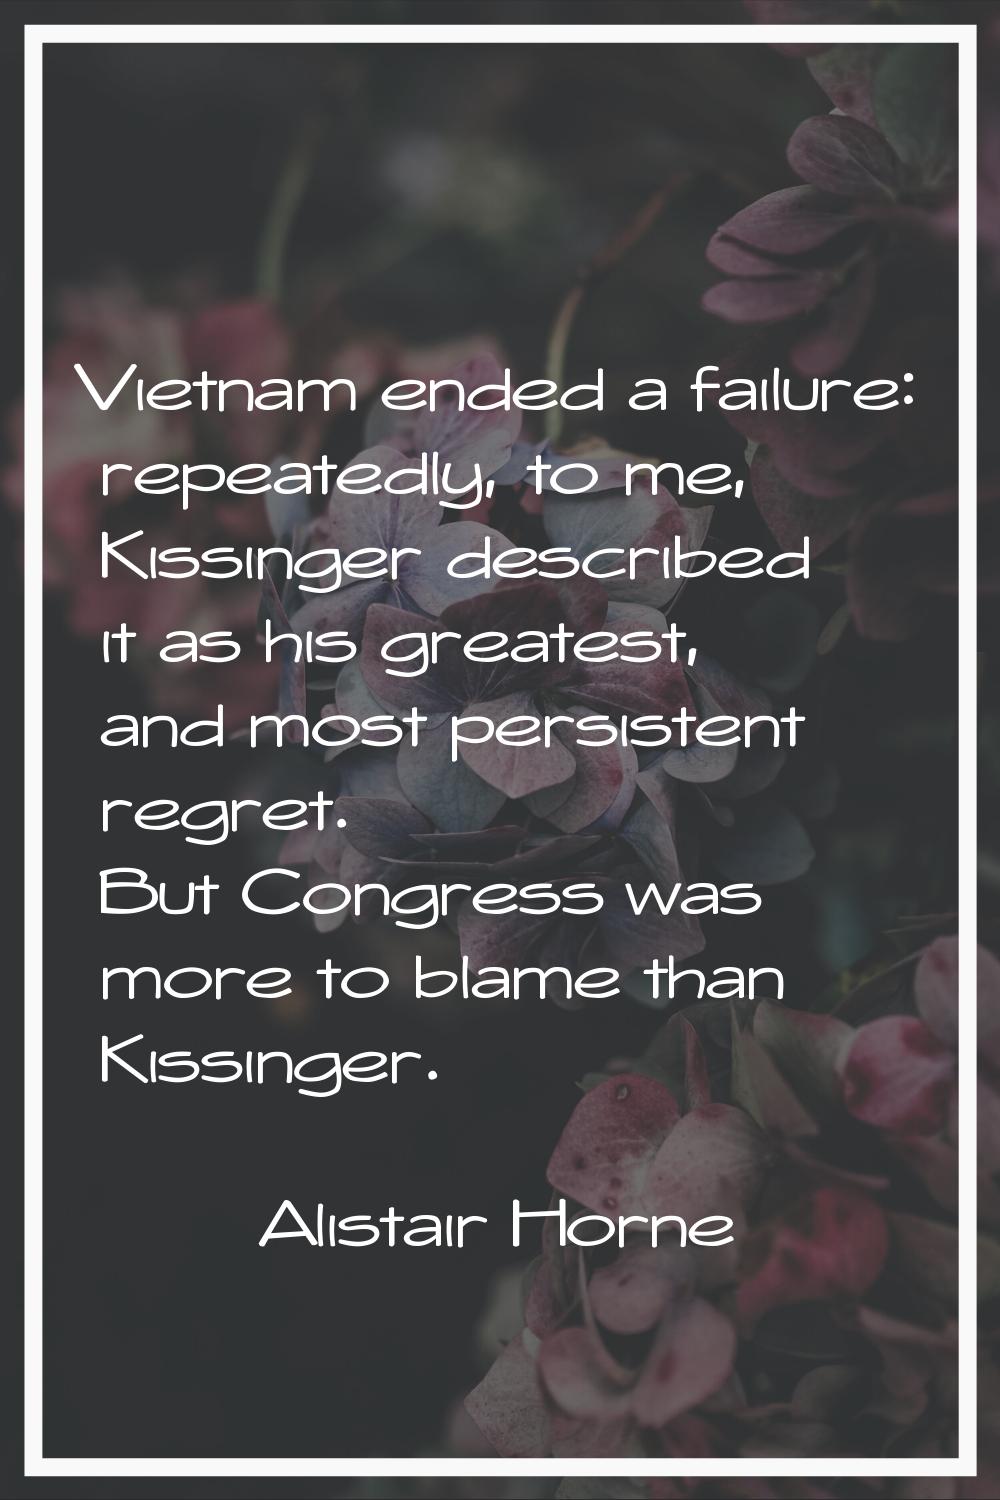 Vietnam ended a failure: repeatedly, to me, Kissinger described it as his greatest, and most persis